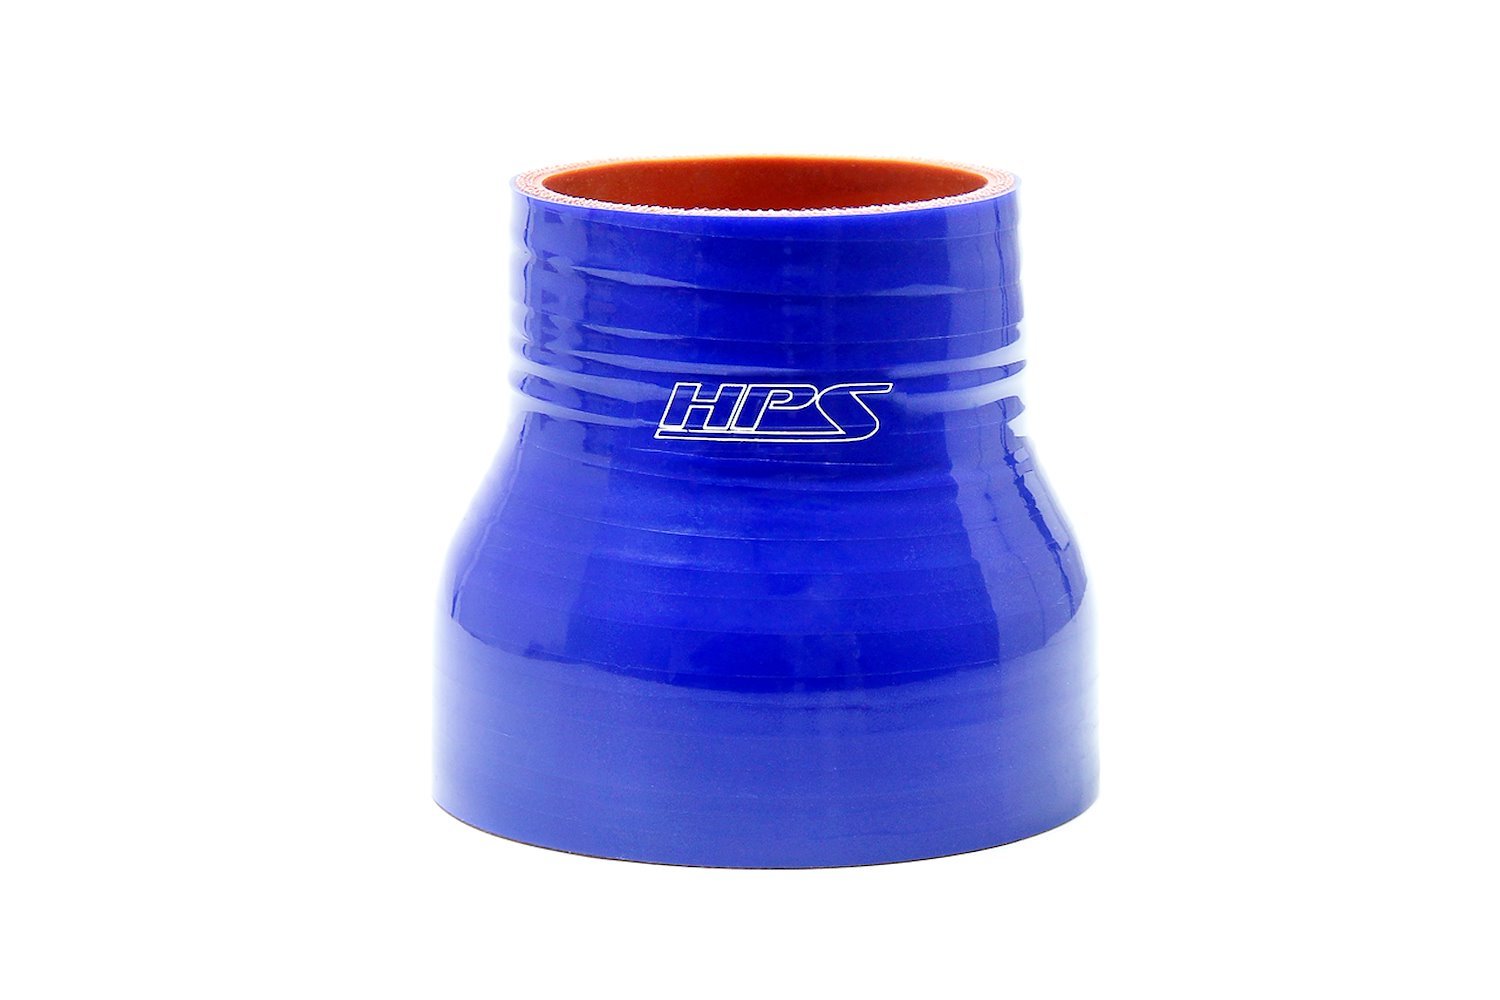 HTSR-275-325-BLUE Silicone Reducer Hose, High-Temp 4-Ply Reinforced, 2-3/4 in. - 3-1/4 in. ID, 3 in. Long, Blue